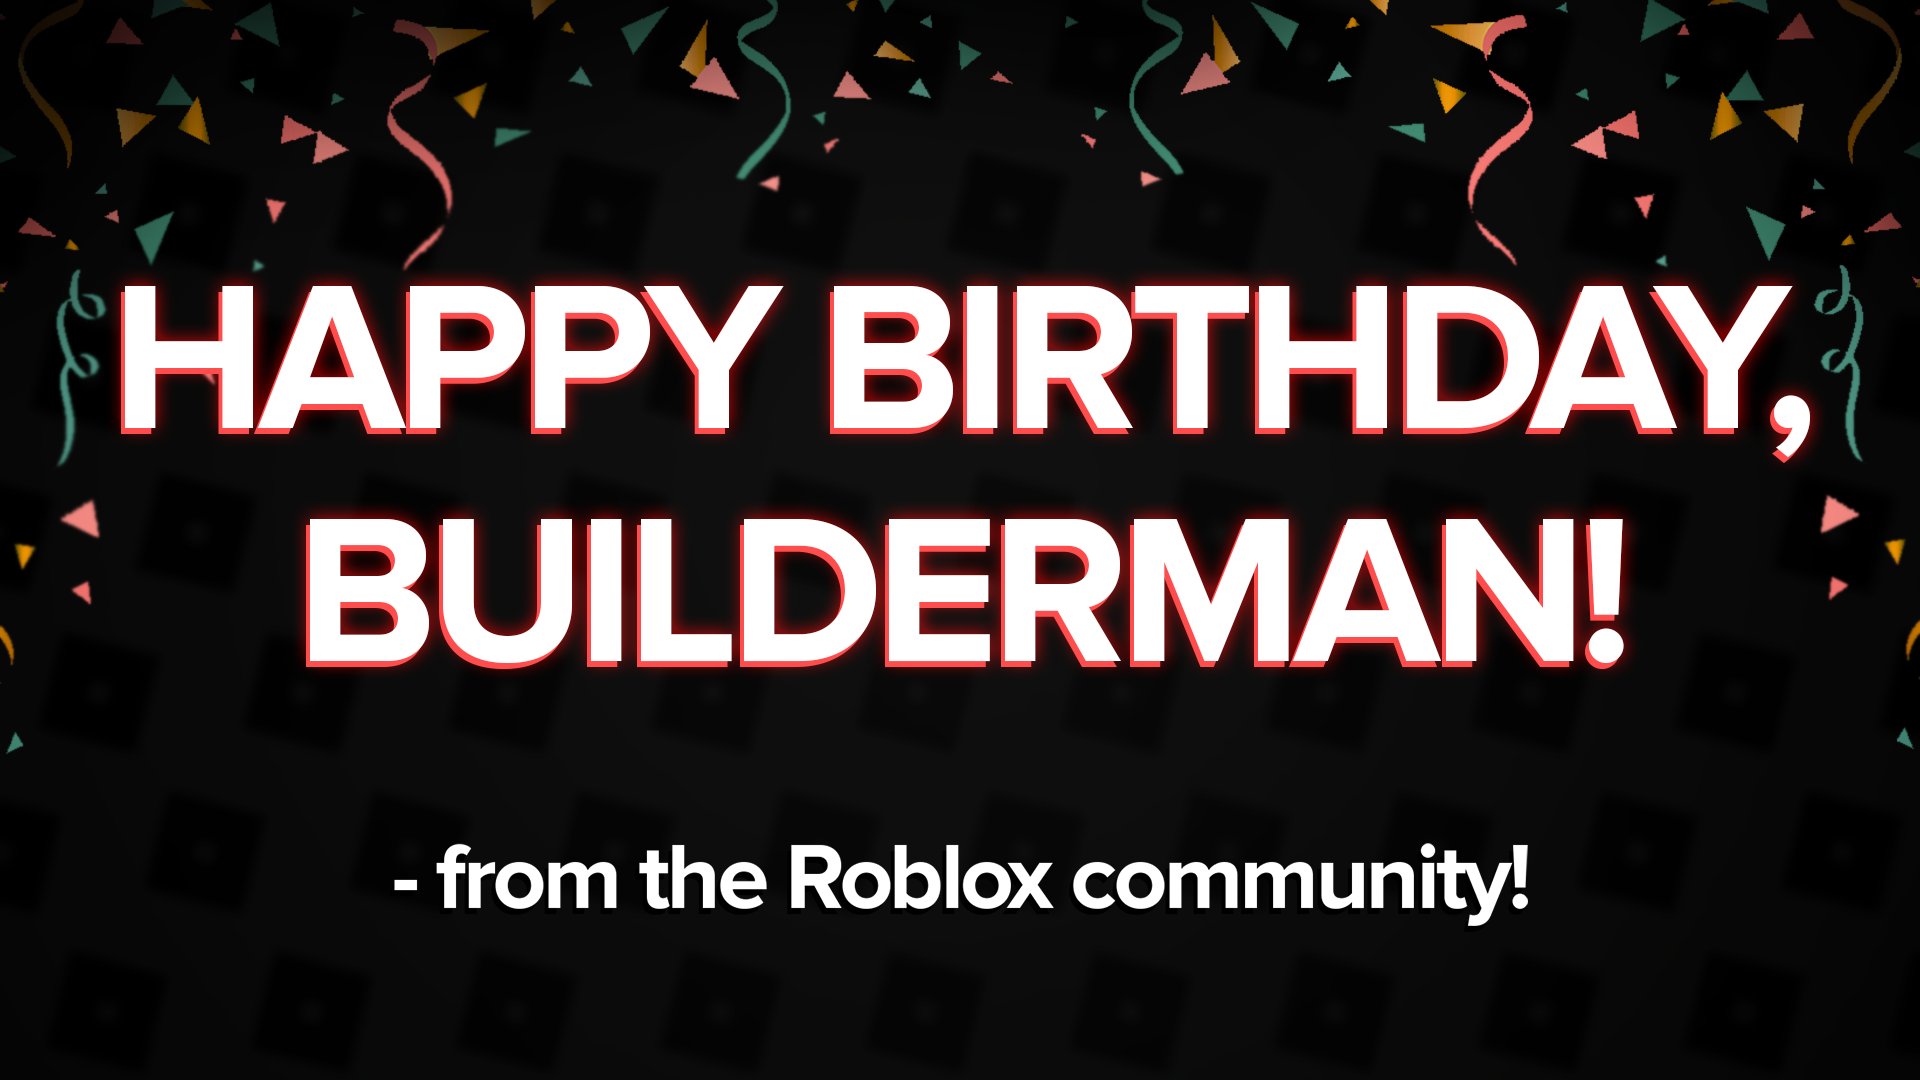 The co-founder and CEO of Roblox has turned 60 today! Happy birthday to the  builderman himself, David Baszucki! : r/roblox